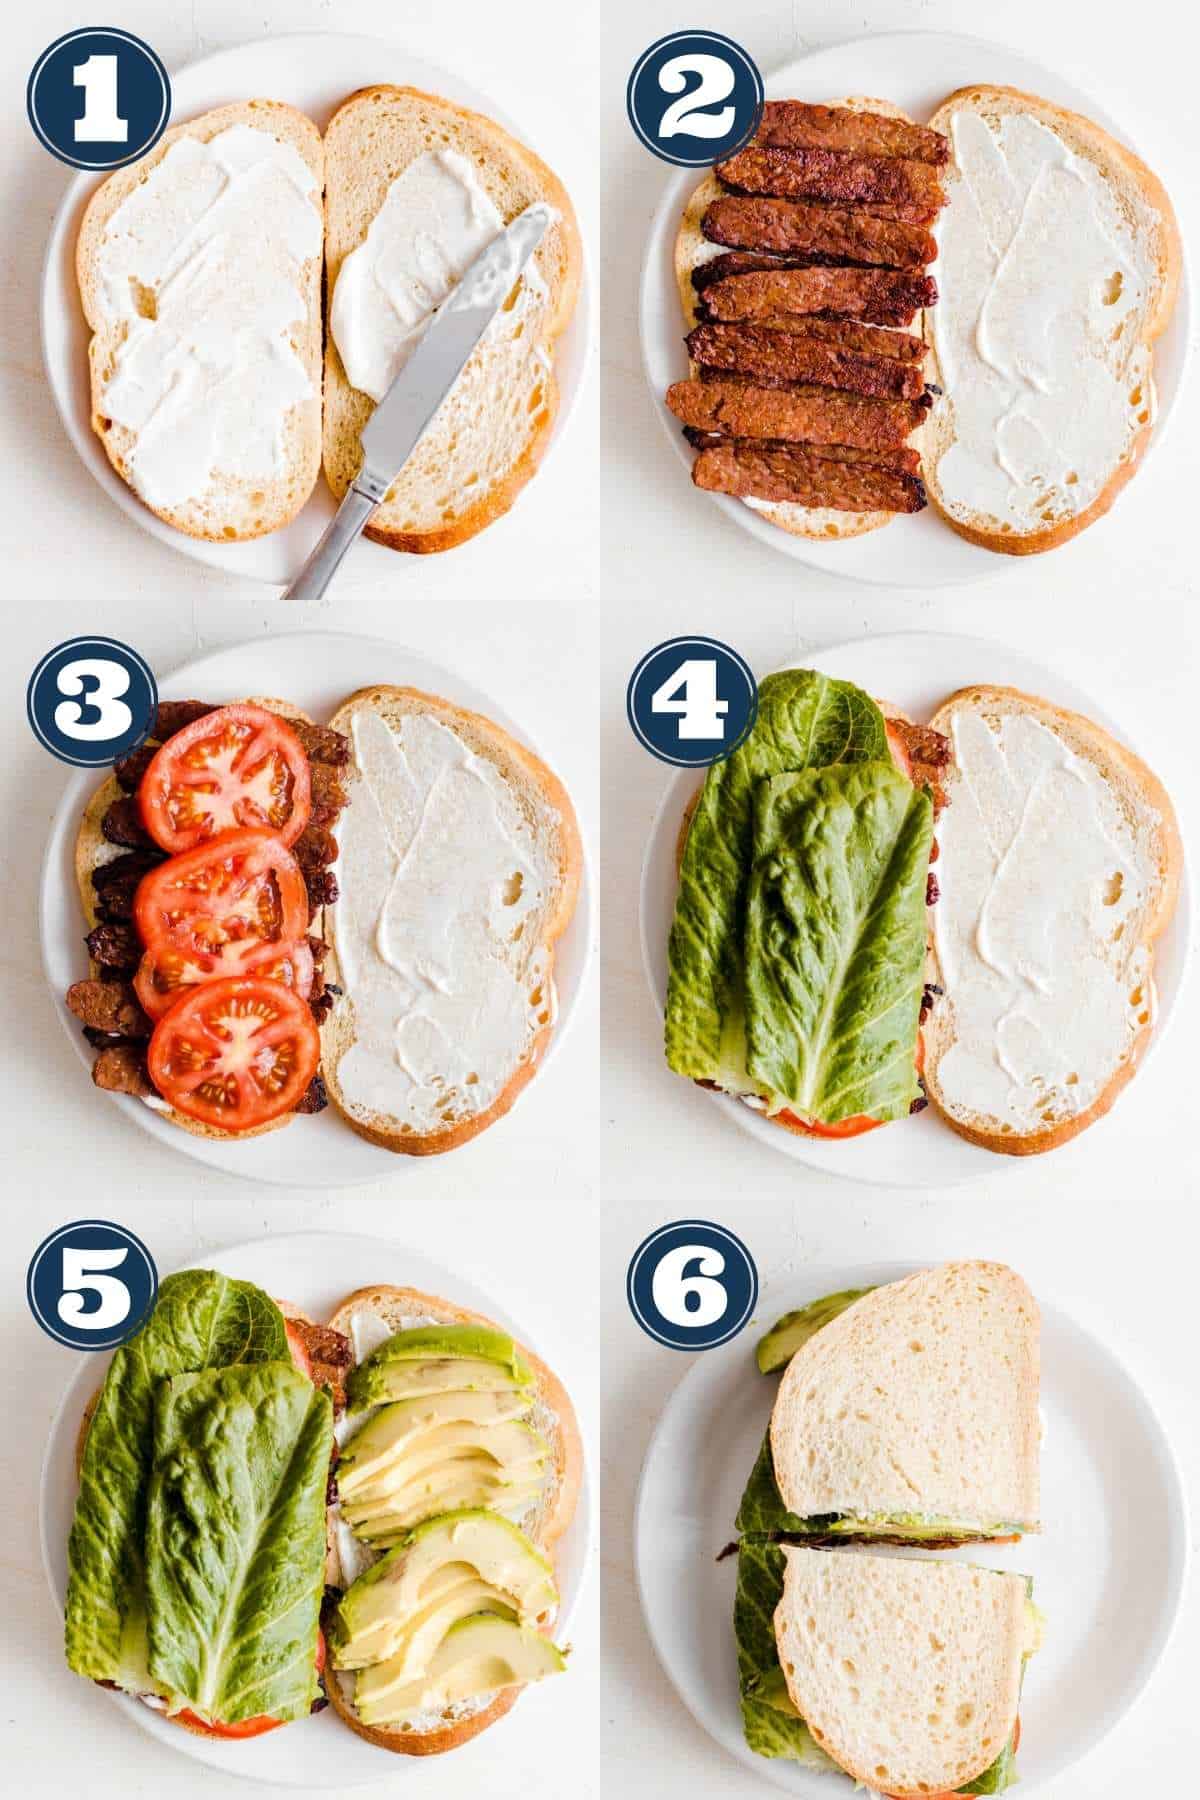 Step by step process of making sandwich.